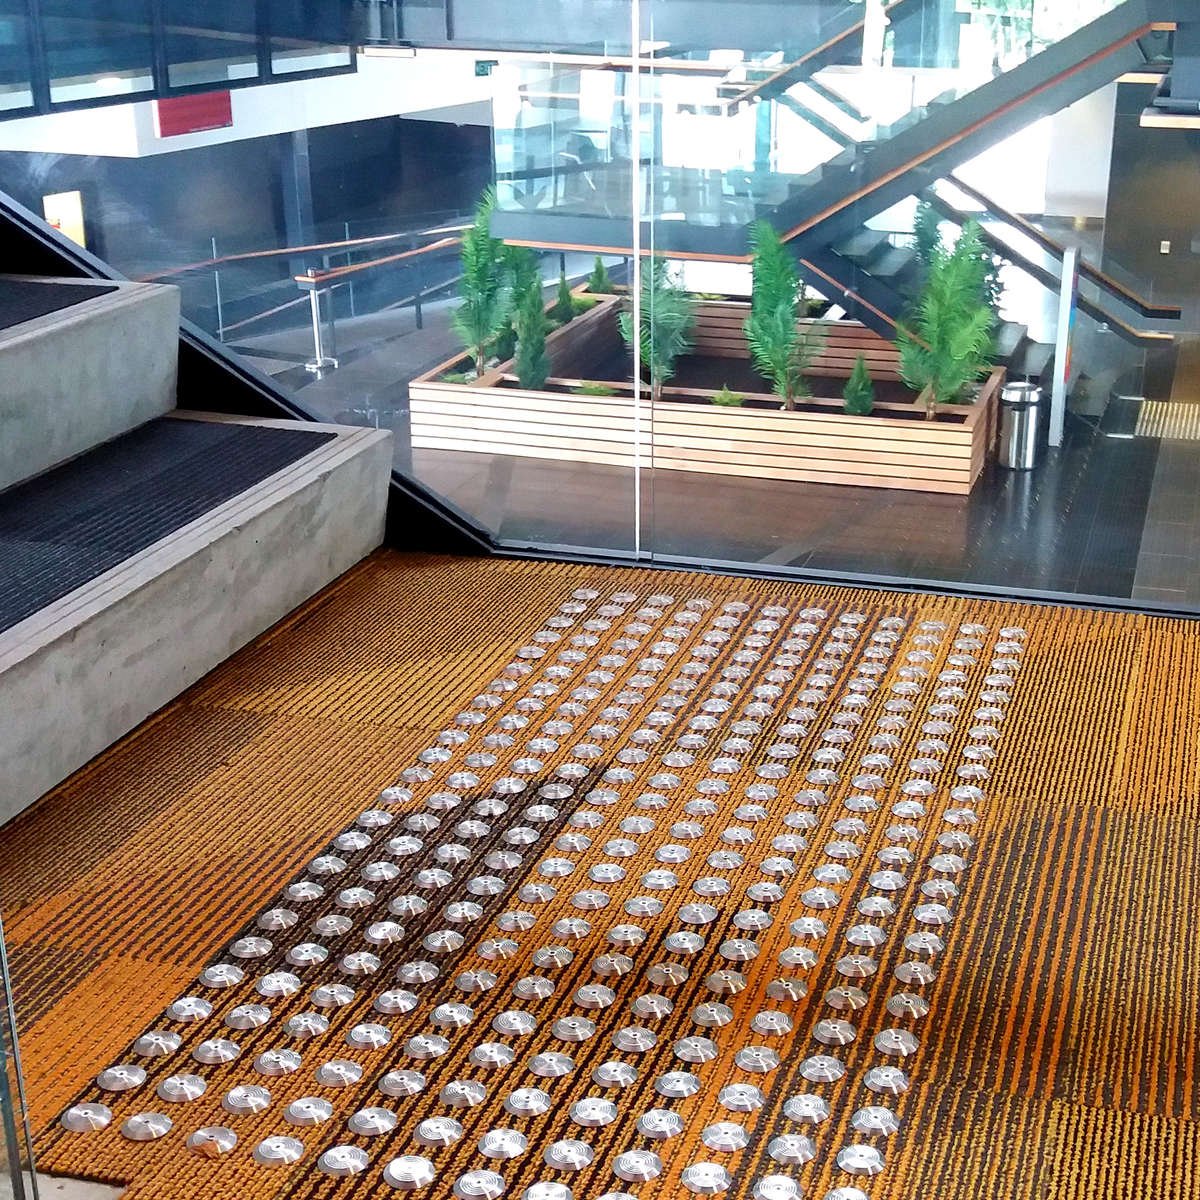 TacPro stainless steel tactile indicators installed to orange/black carpet at bottom of stairs